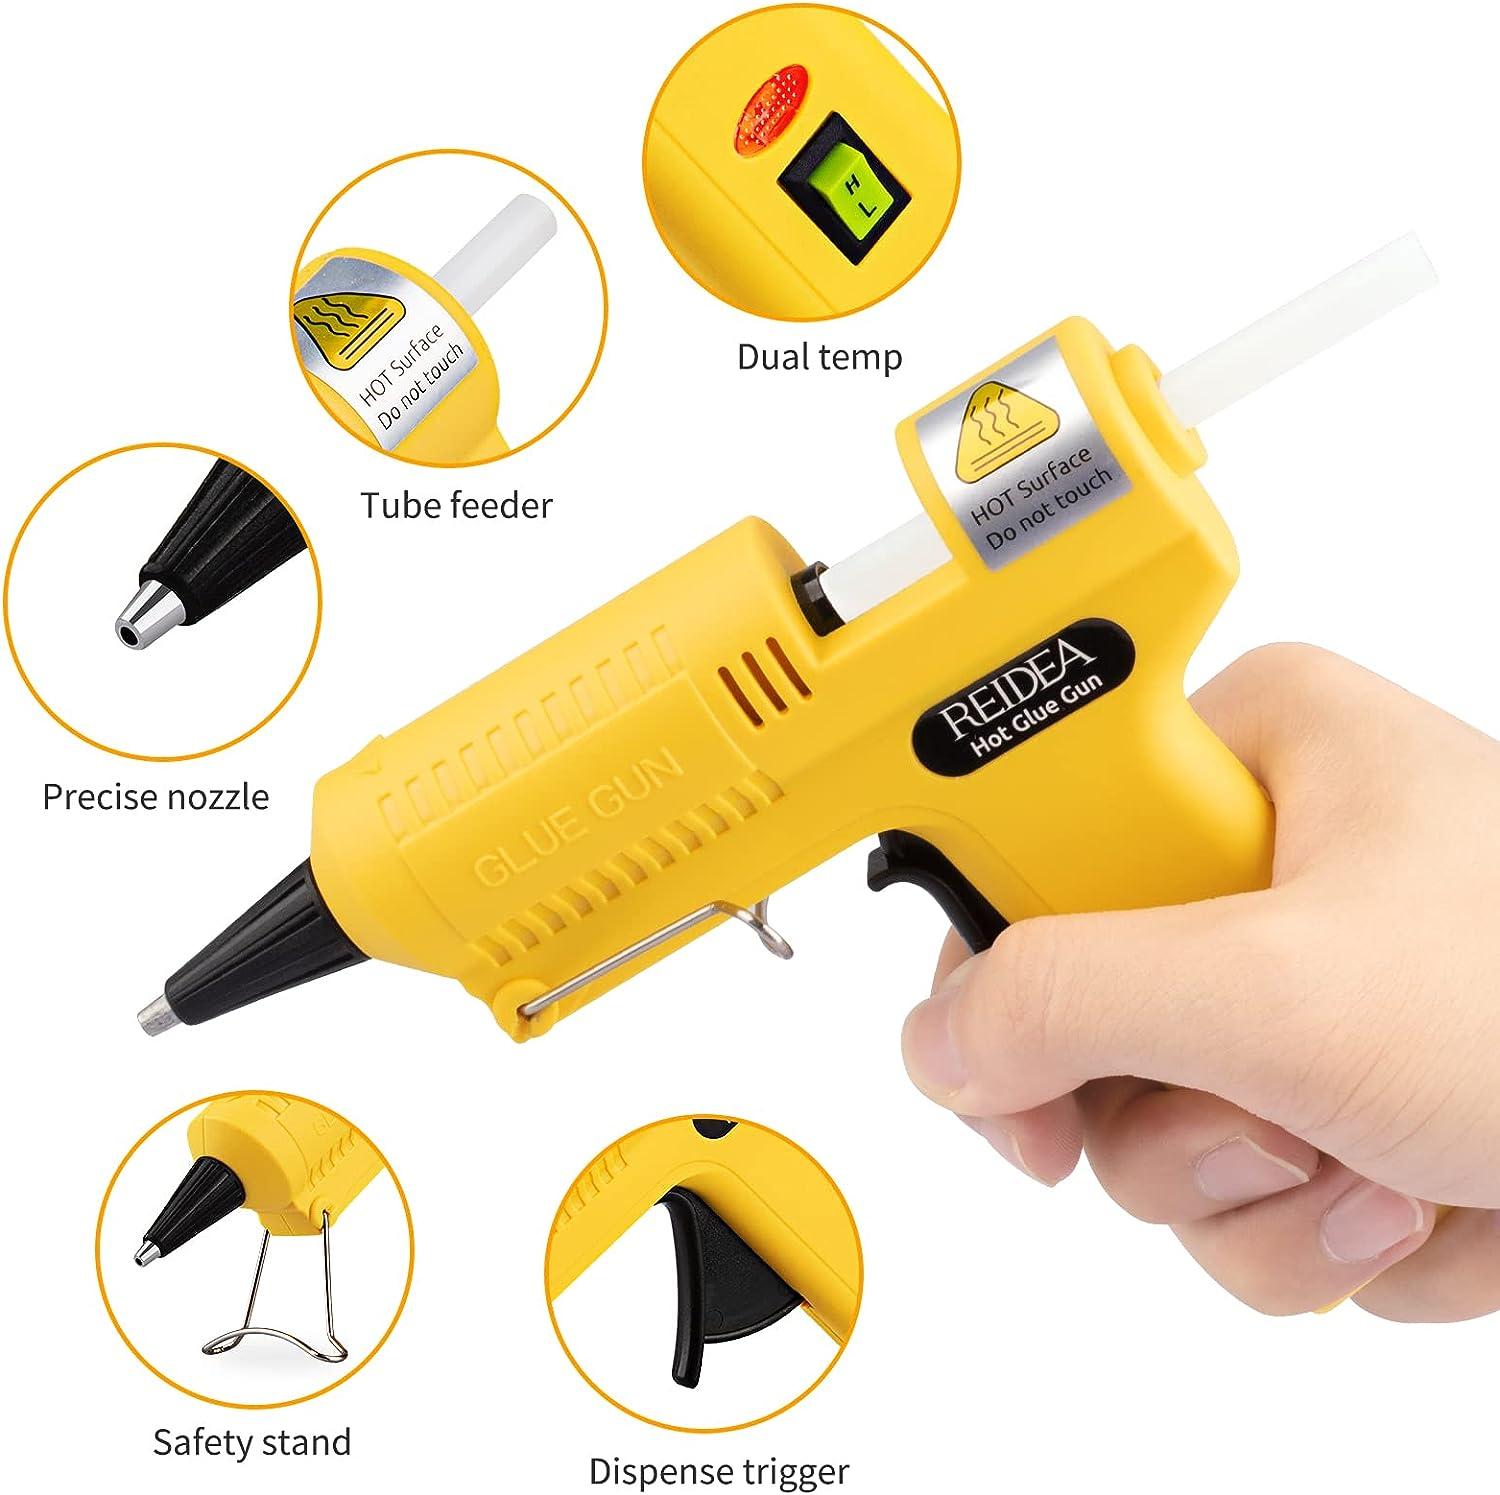 REIDEA Mini Hot Glue Gun Fast Heating with Support Kickstand for DIY Arts &  Crafts Projects Home Repairs Card Plastic Wood Glass Fabric Yellow